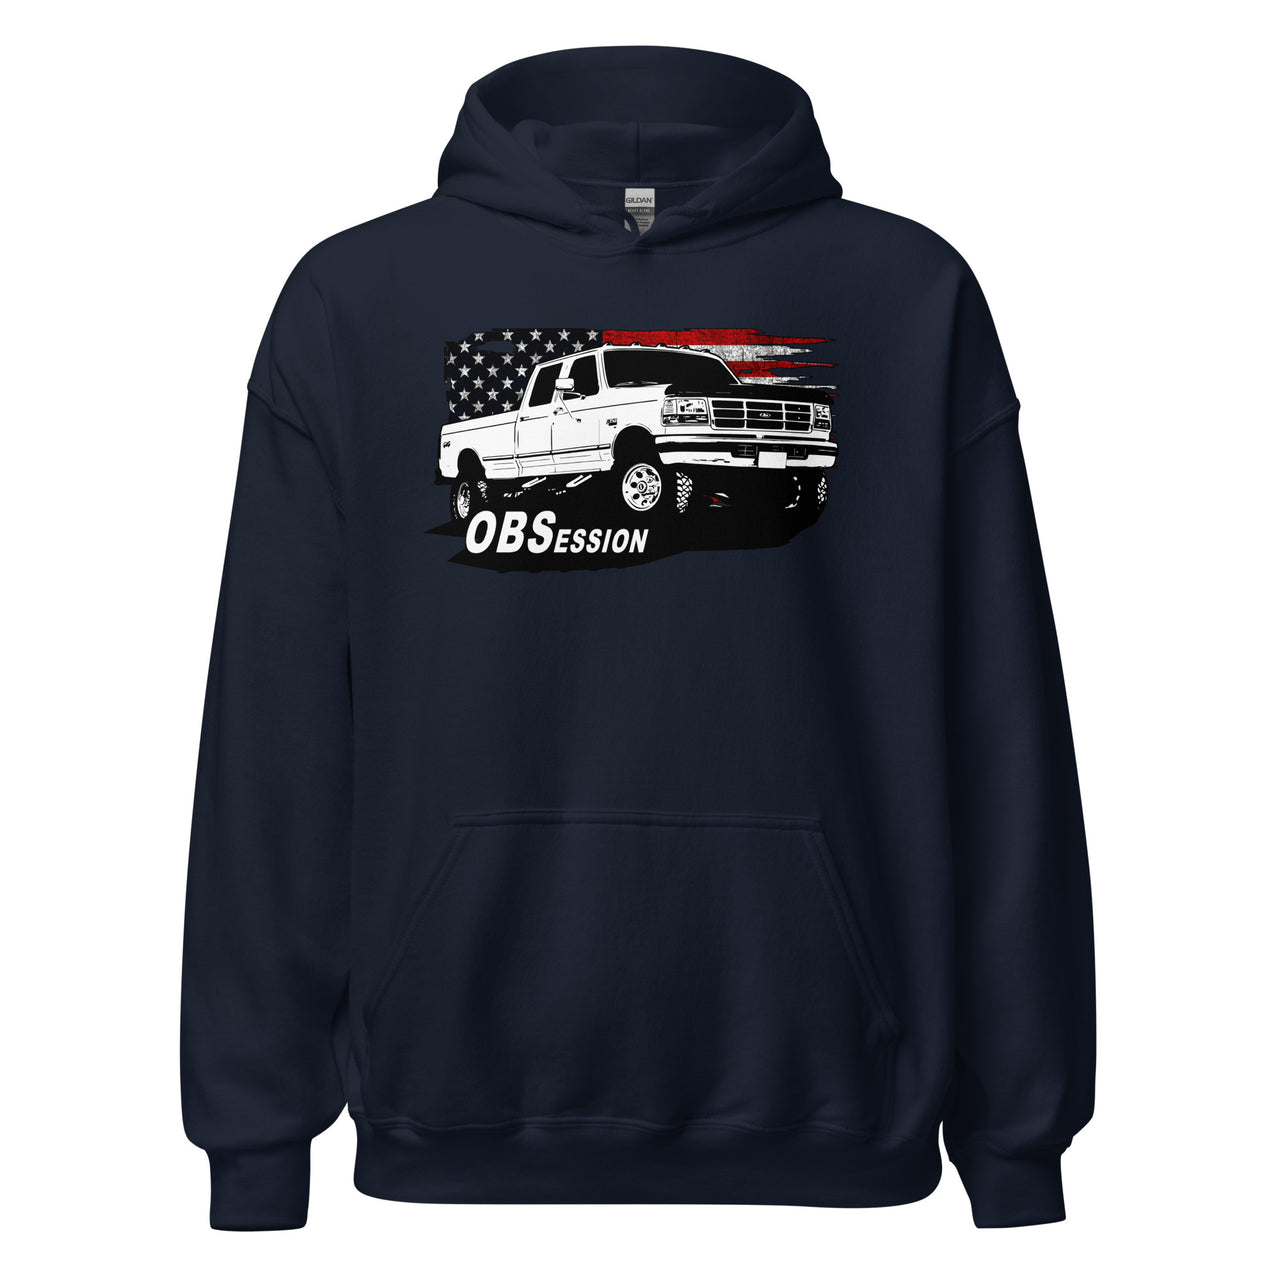 OBS Crew Cab Truck Hoodie with American Flag design - navy